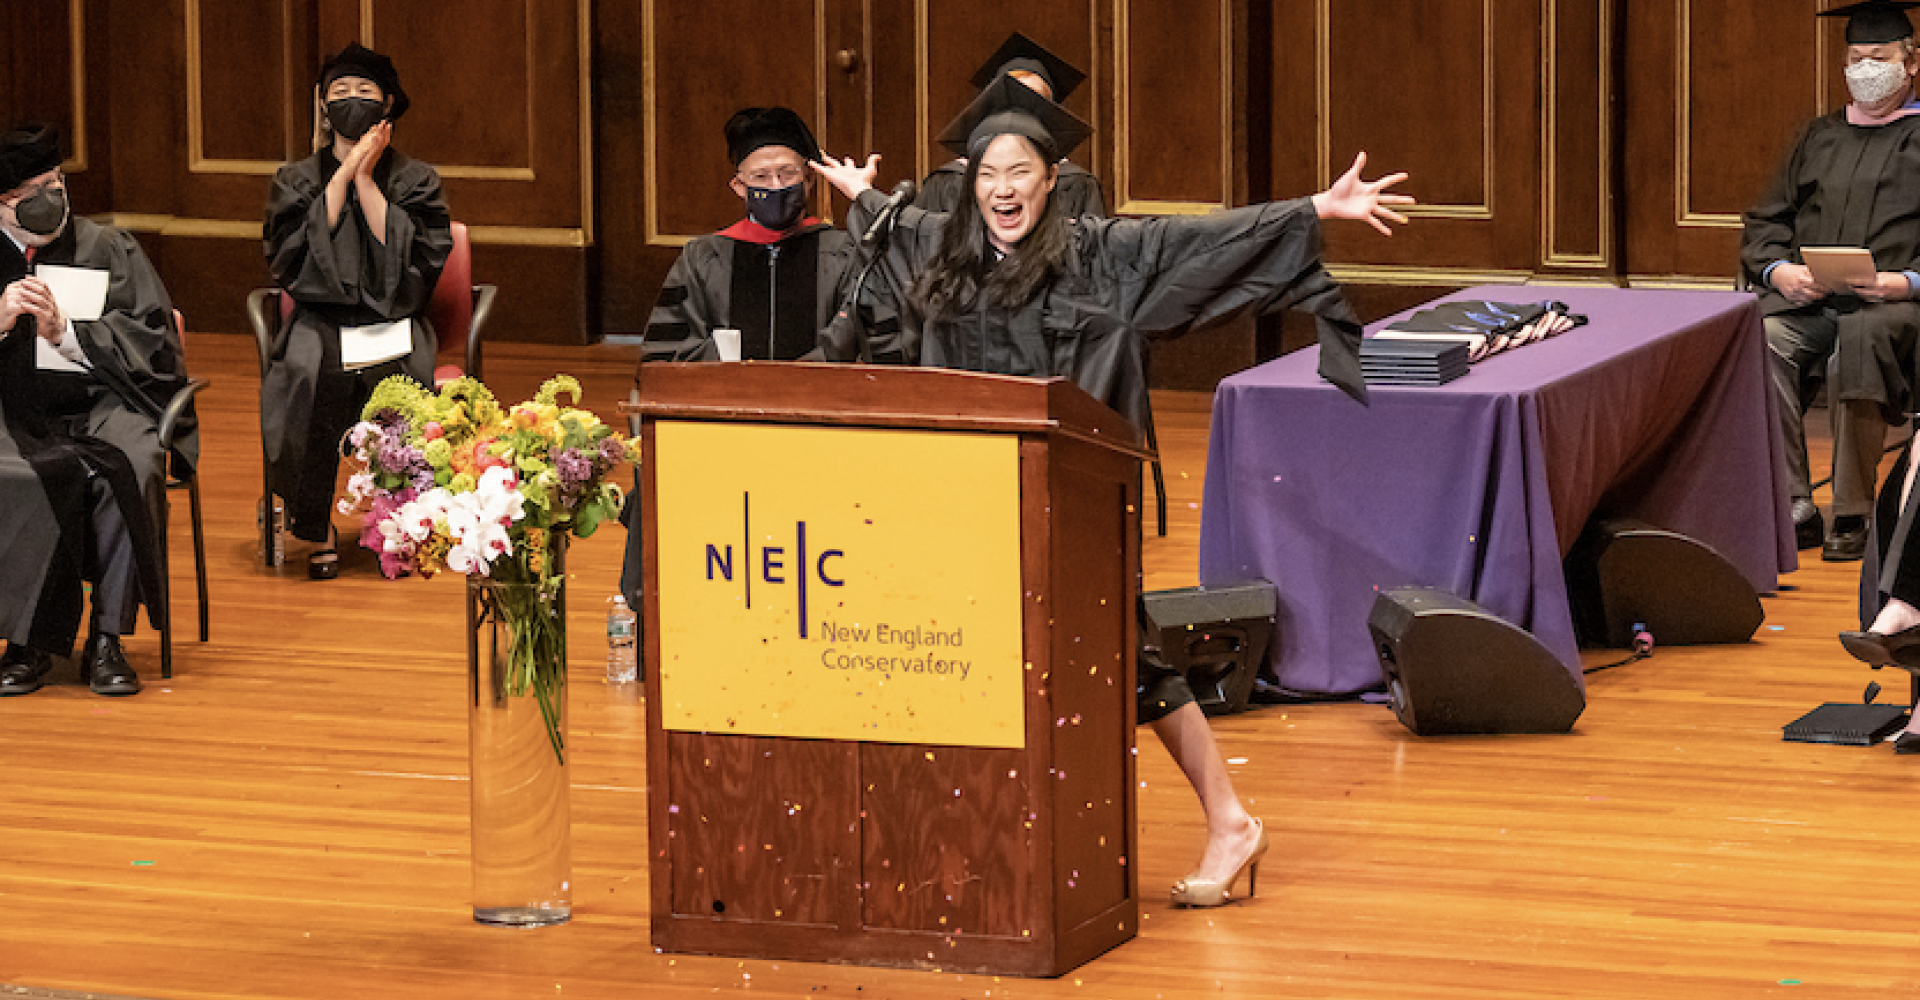 Esther Tien, wearing a graduation cap and gown, opens her arms wide and flings confetti while speaking at the podium at Commencement 2021.